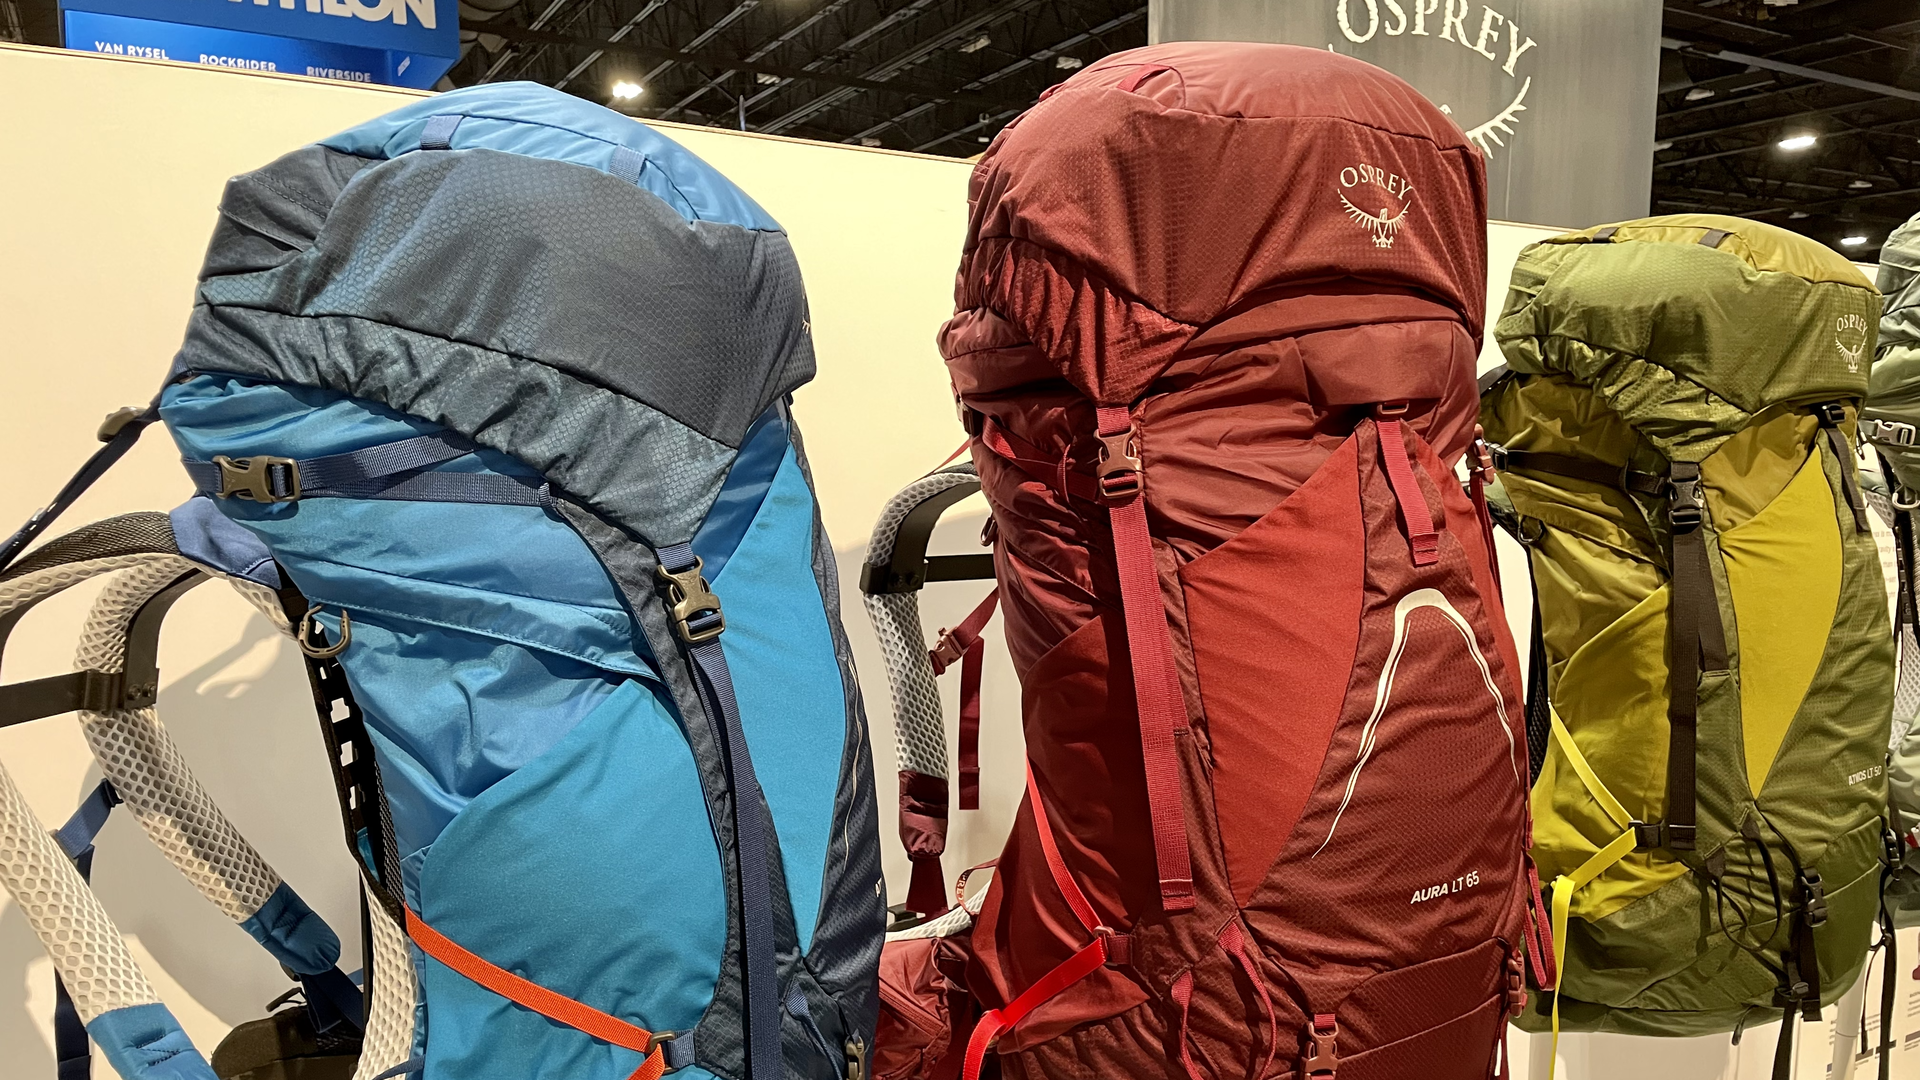 Osprey backpacks on display at the recent Outdoor Retailer Summer Show in Denver. Photo: John Frank/Axios